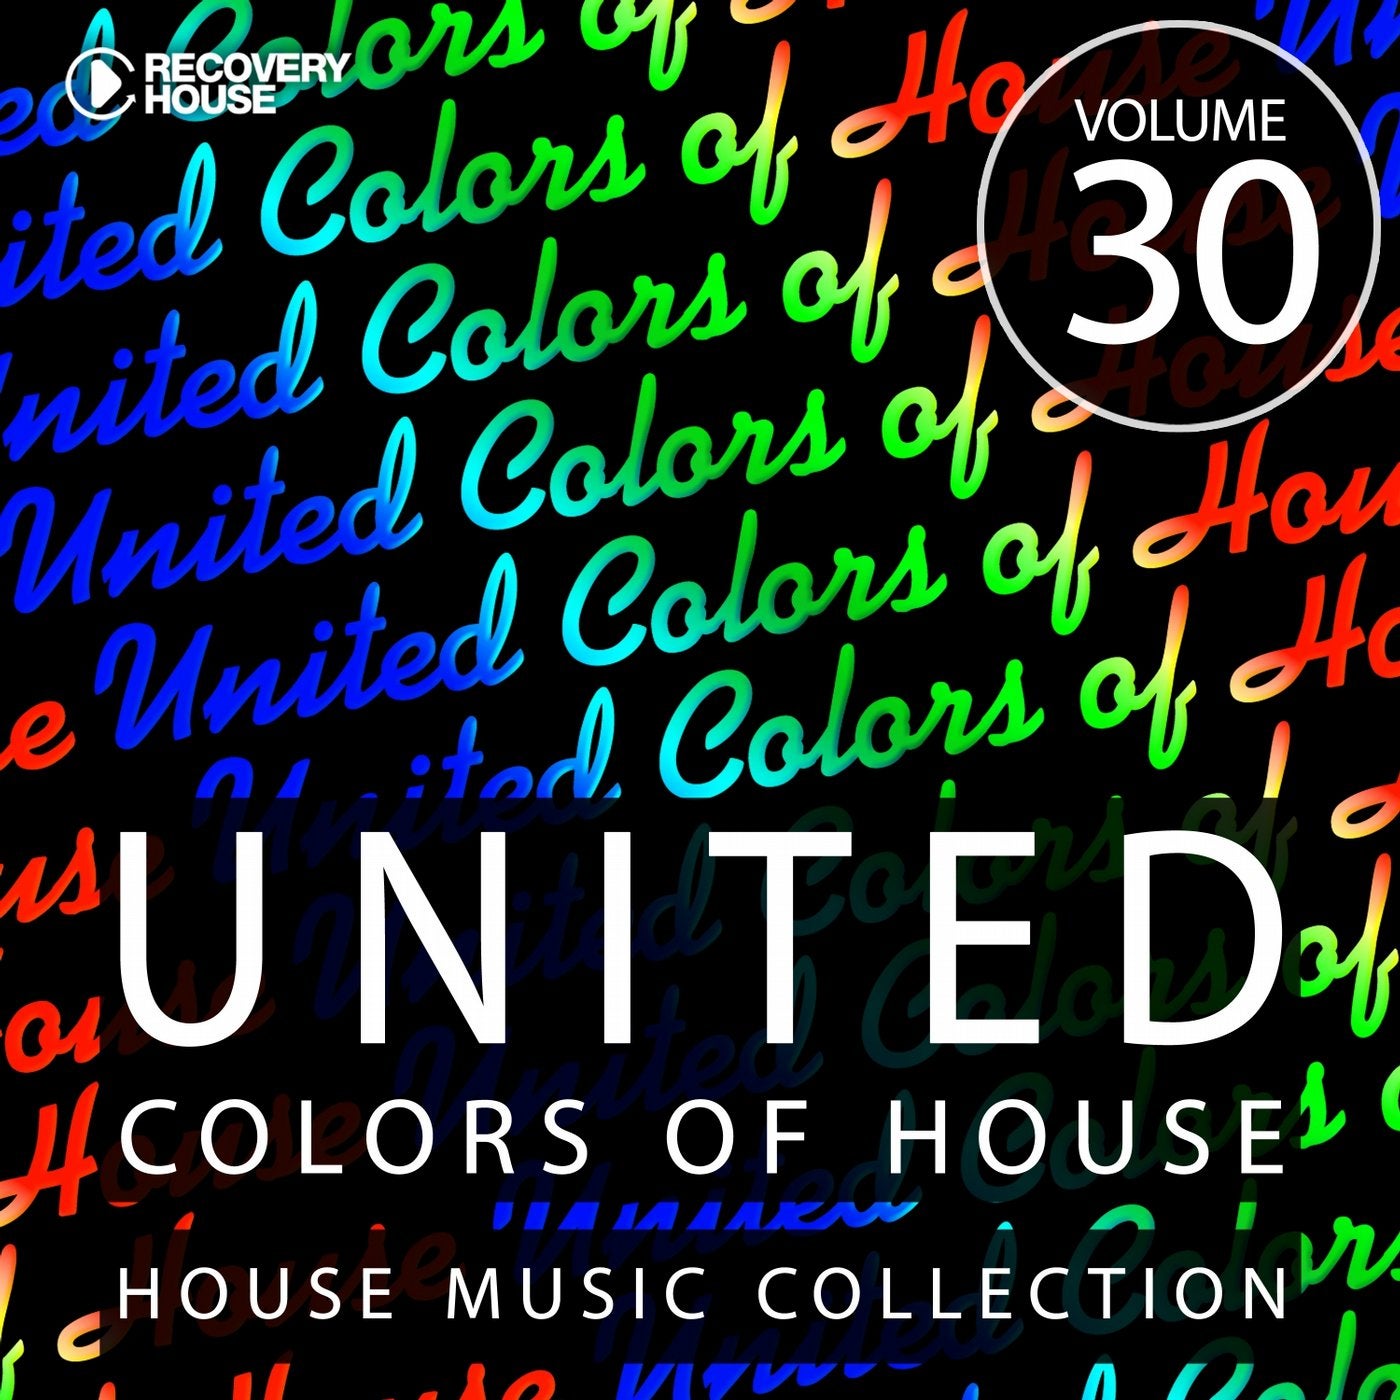 United Colors Of House Volume 30